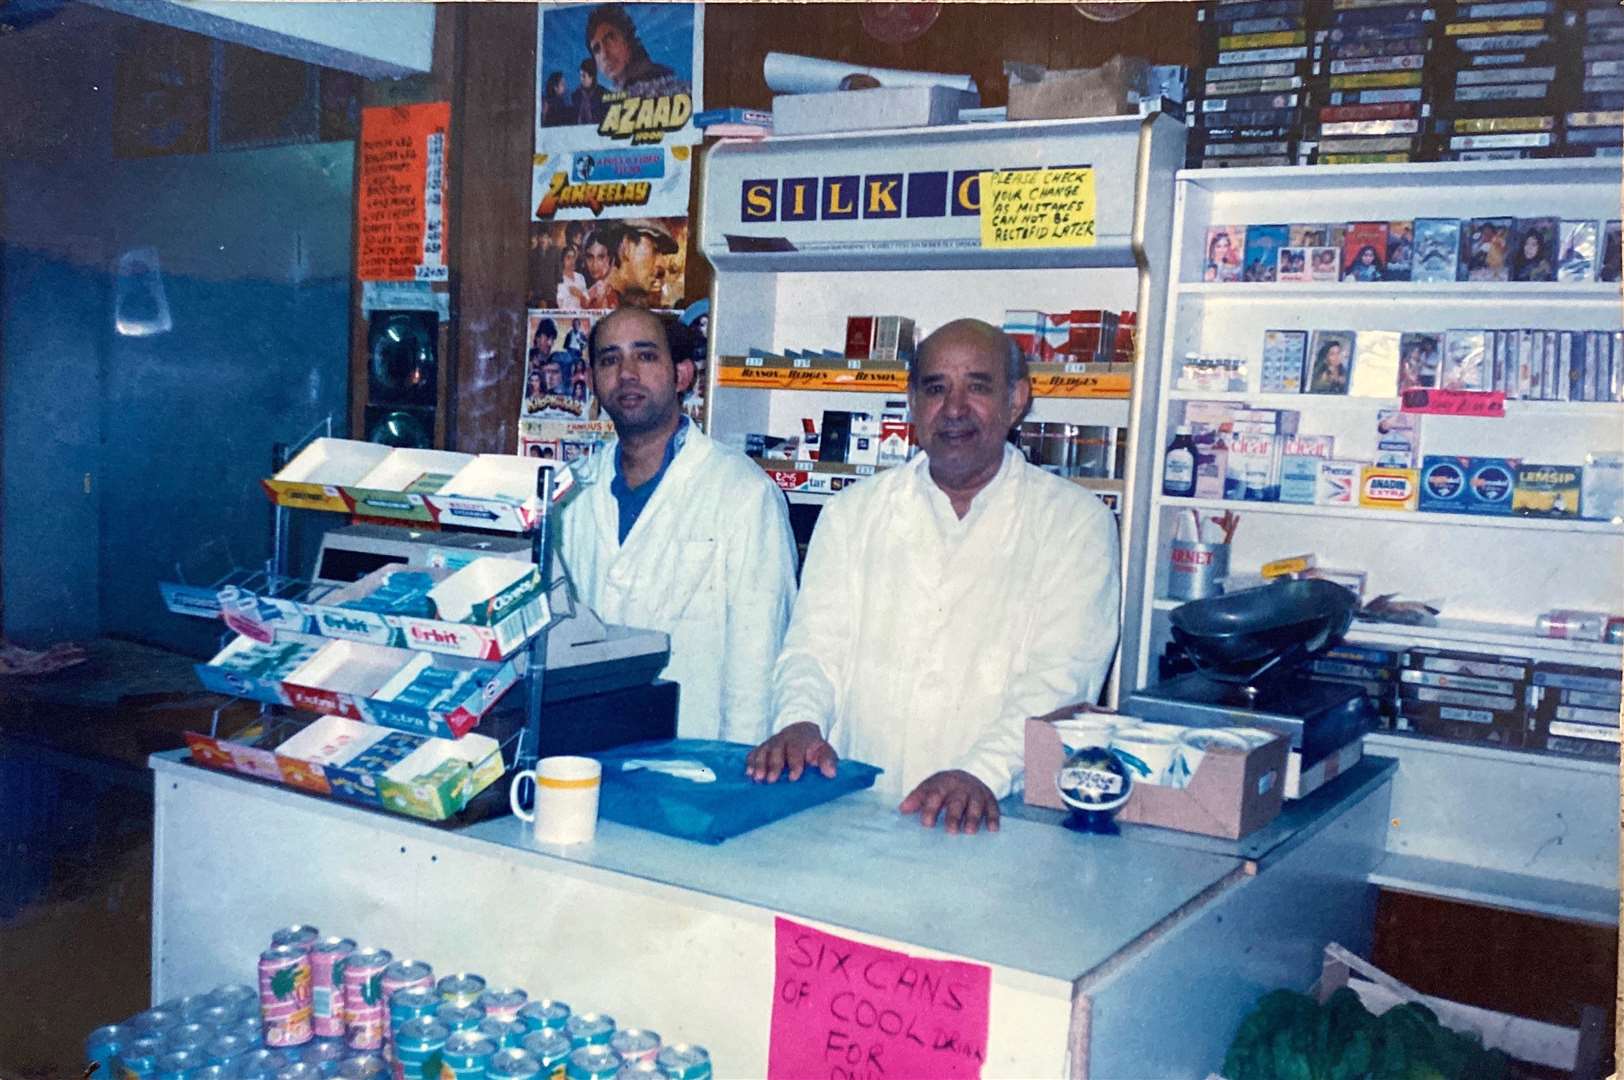 Father Hakim and his son Altaf man the store